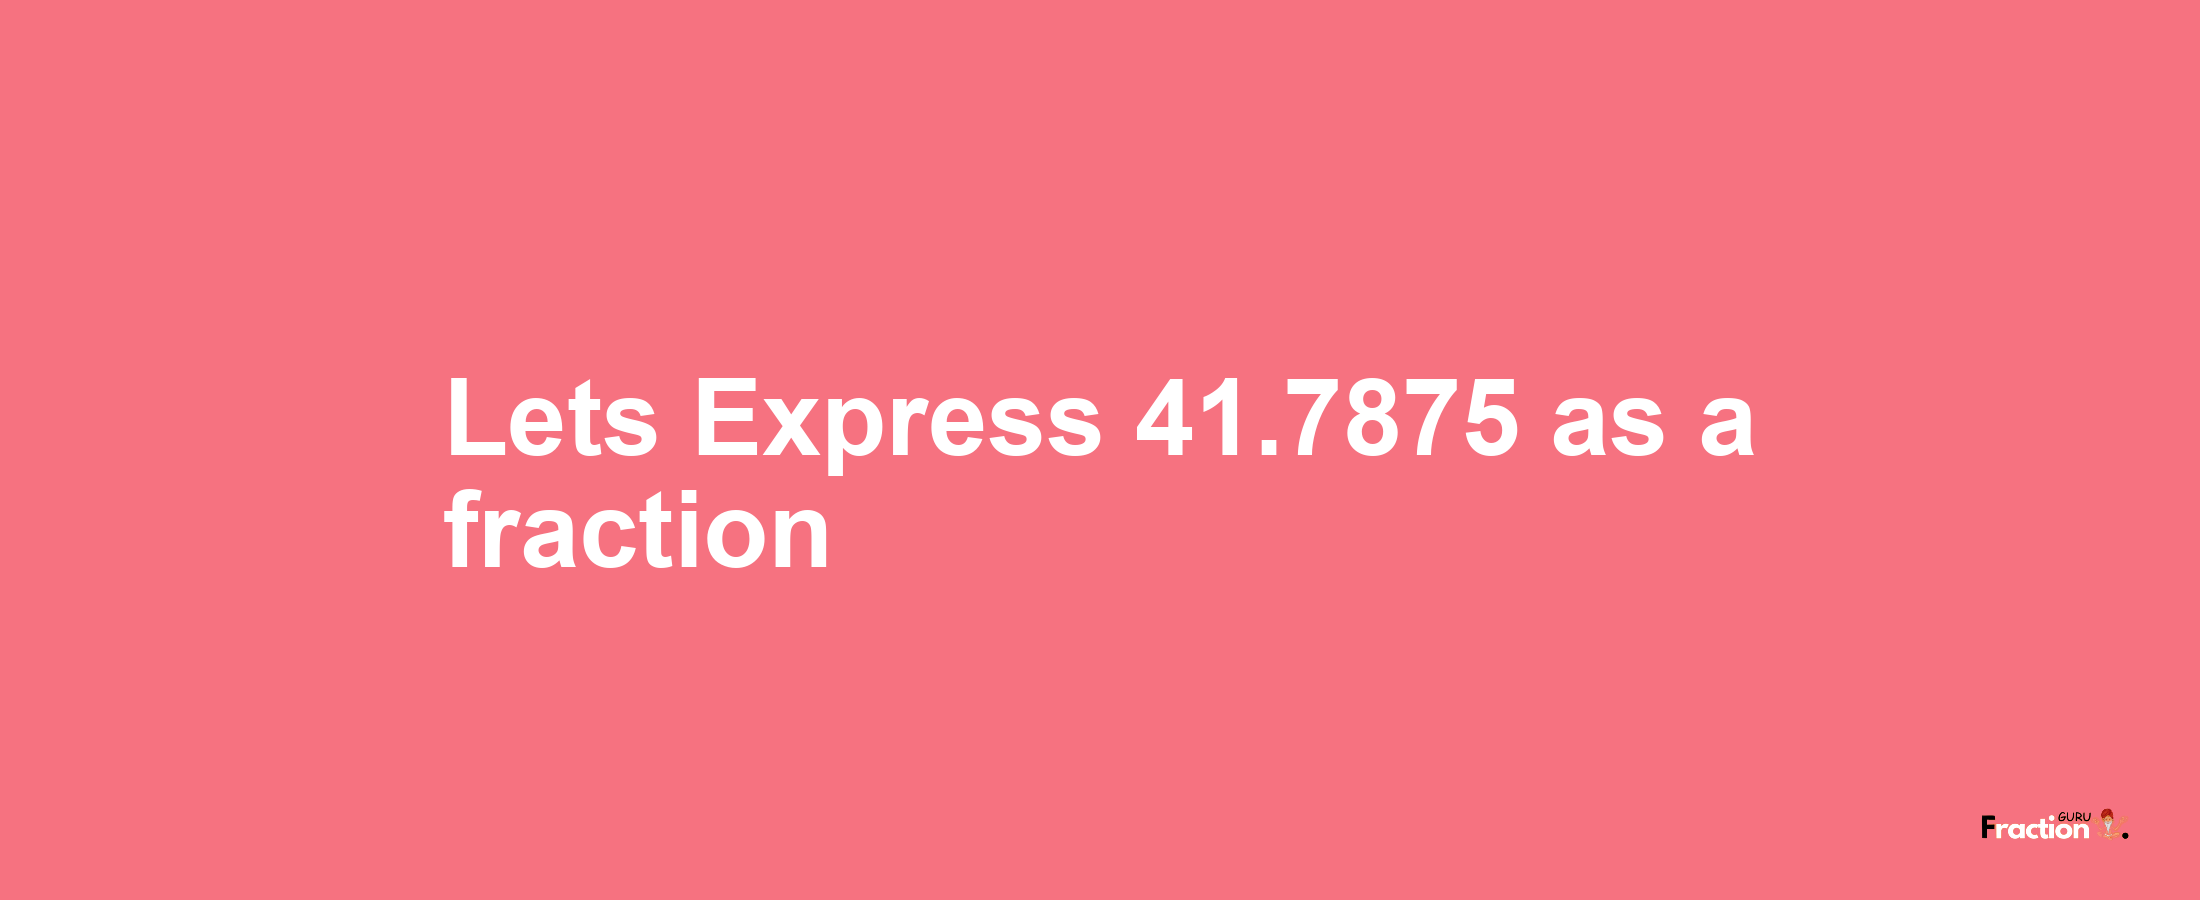 Lets Express 41.7875 as afraction